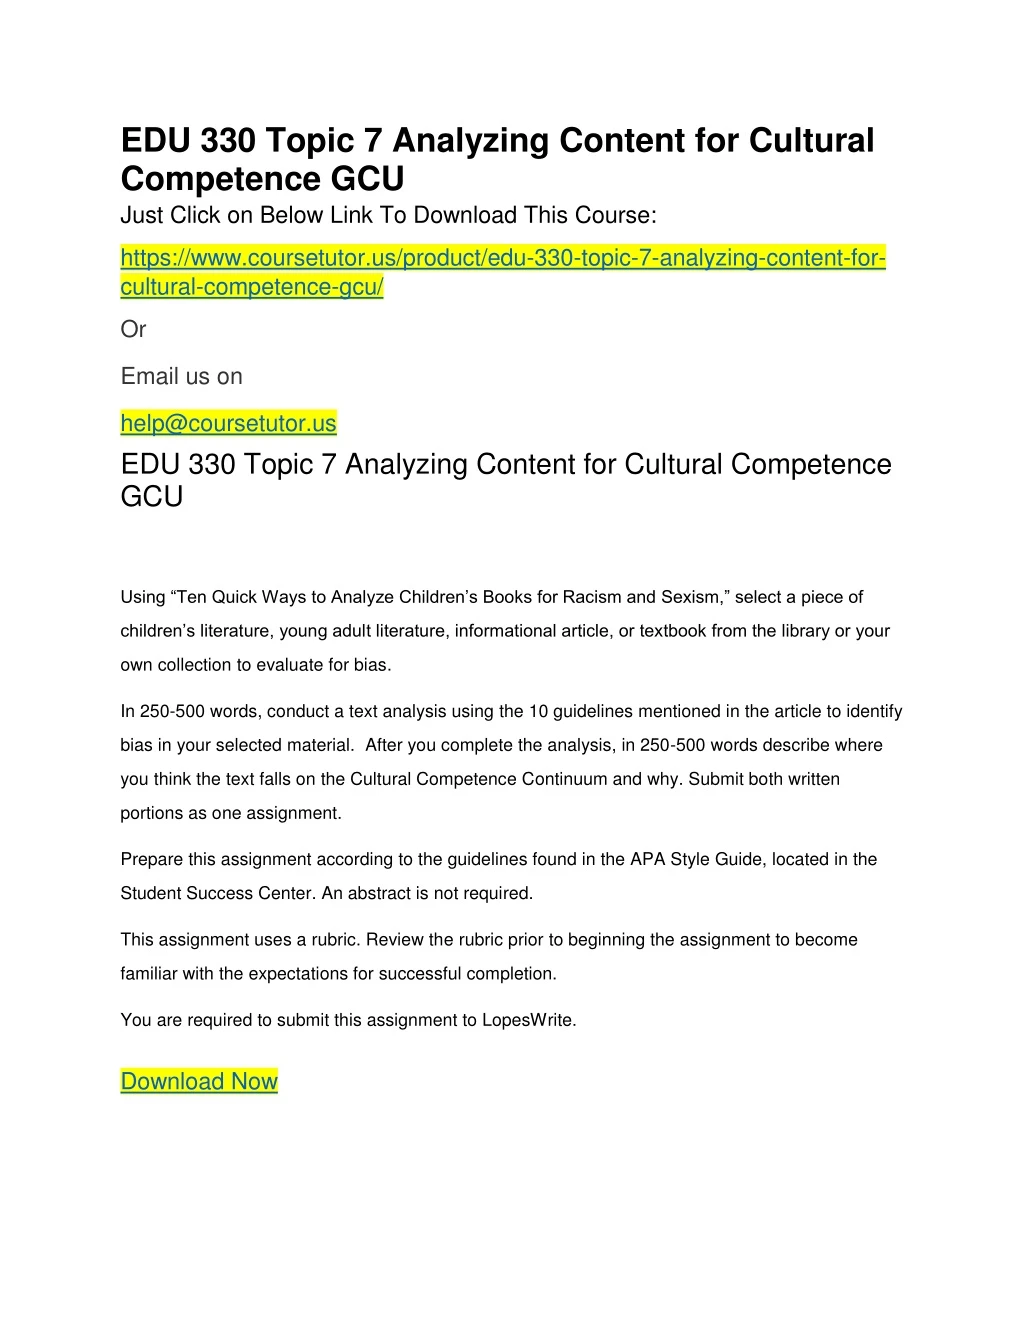 edu 330 topic 7 analyzing content for cultural